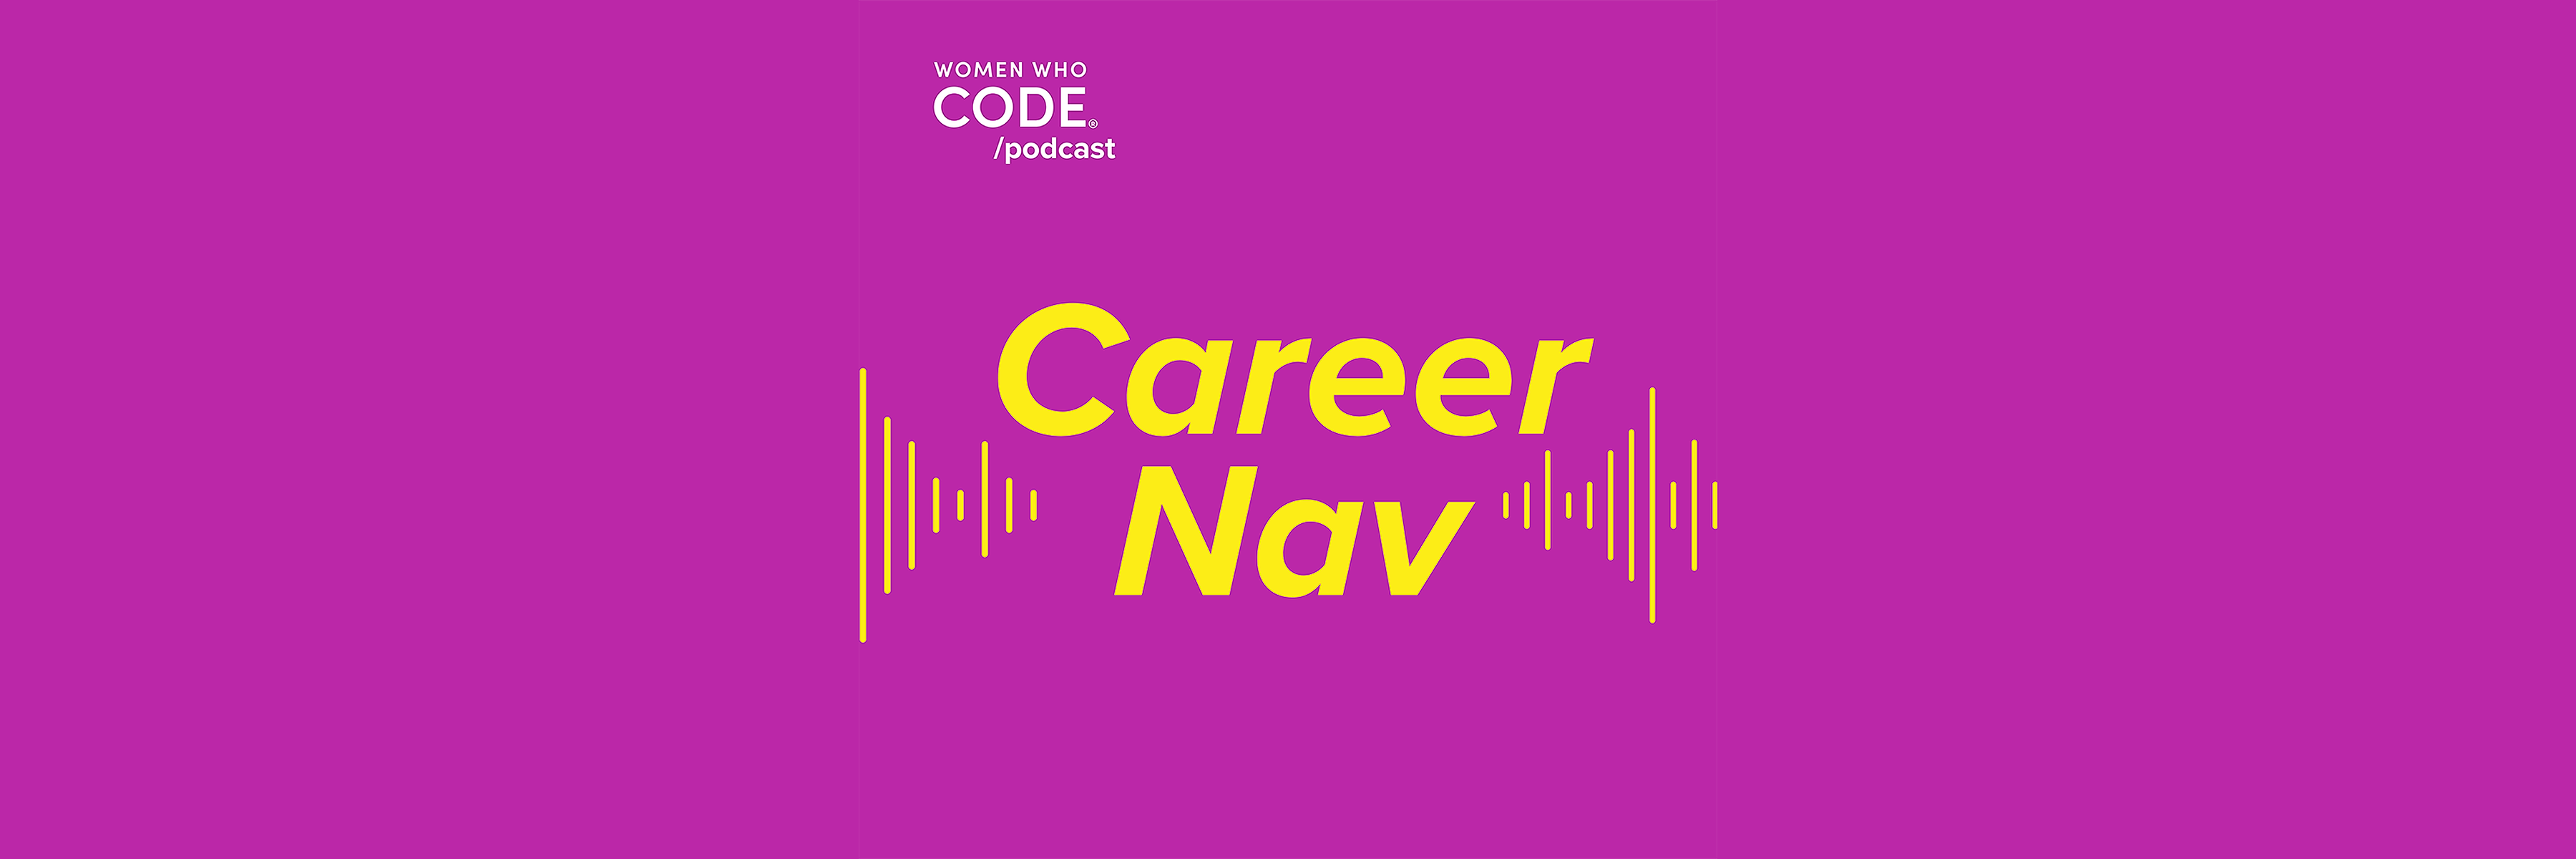 Career Nav #32: Demanding More: Why Diversity and Inclusion Don’t Happen